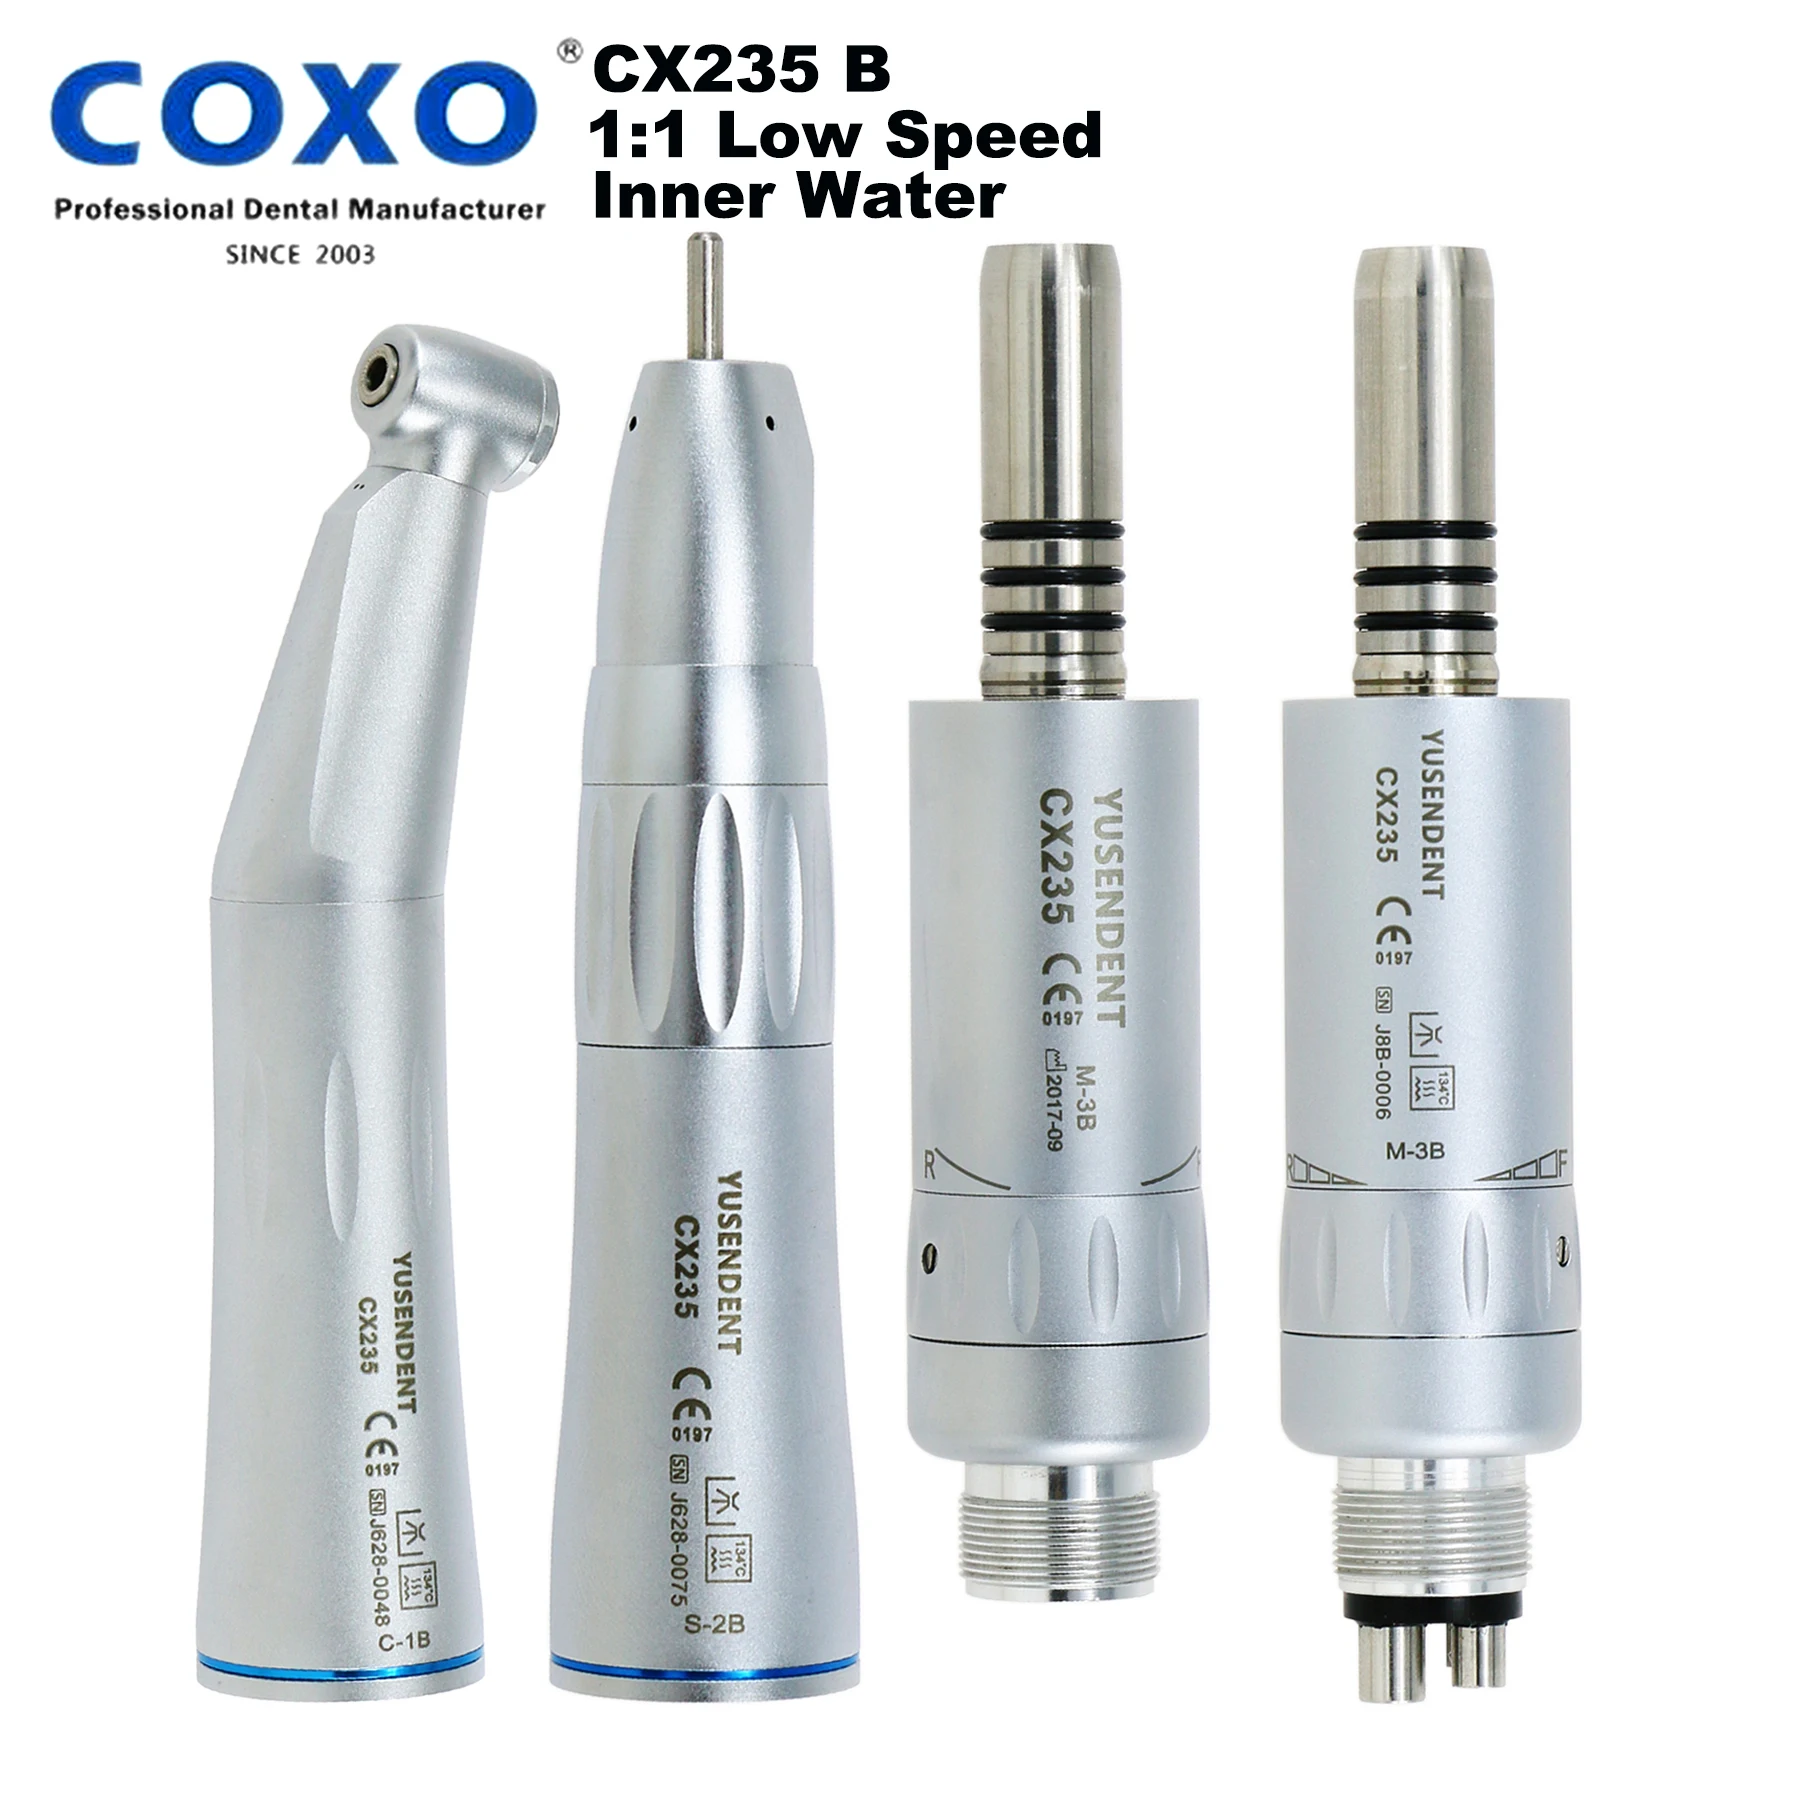 COXO YUSENDENT 1:1 Inner Water Low Speed Contra Angle Air Motor 2 4 Holes Fit For ISO E type Handpiece NSK KAVO